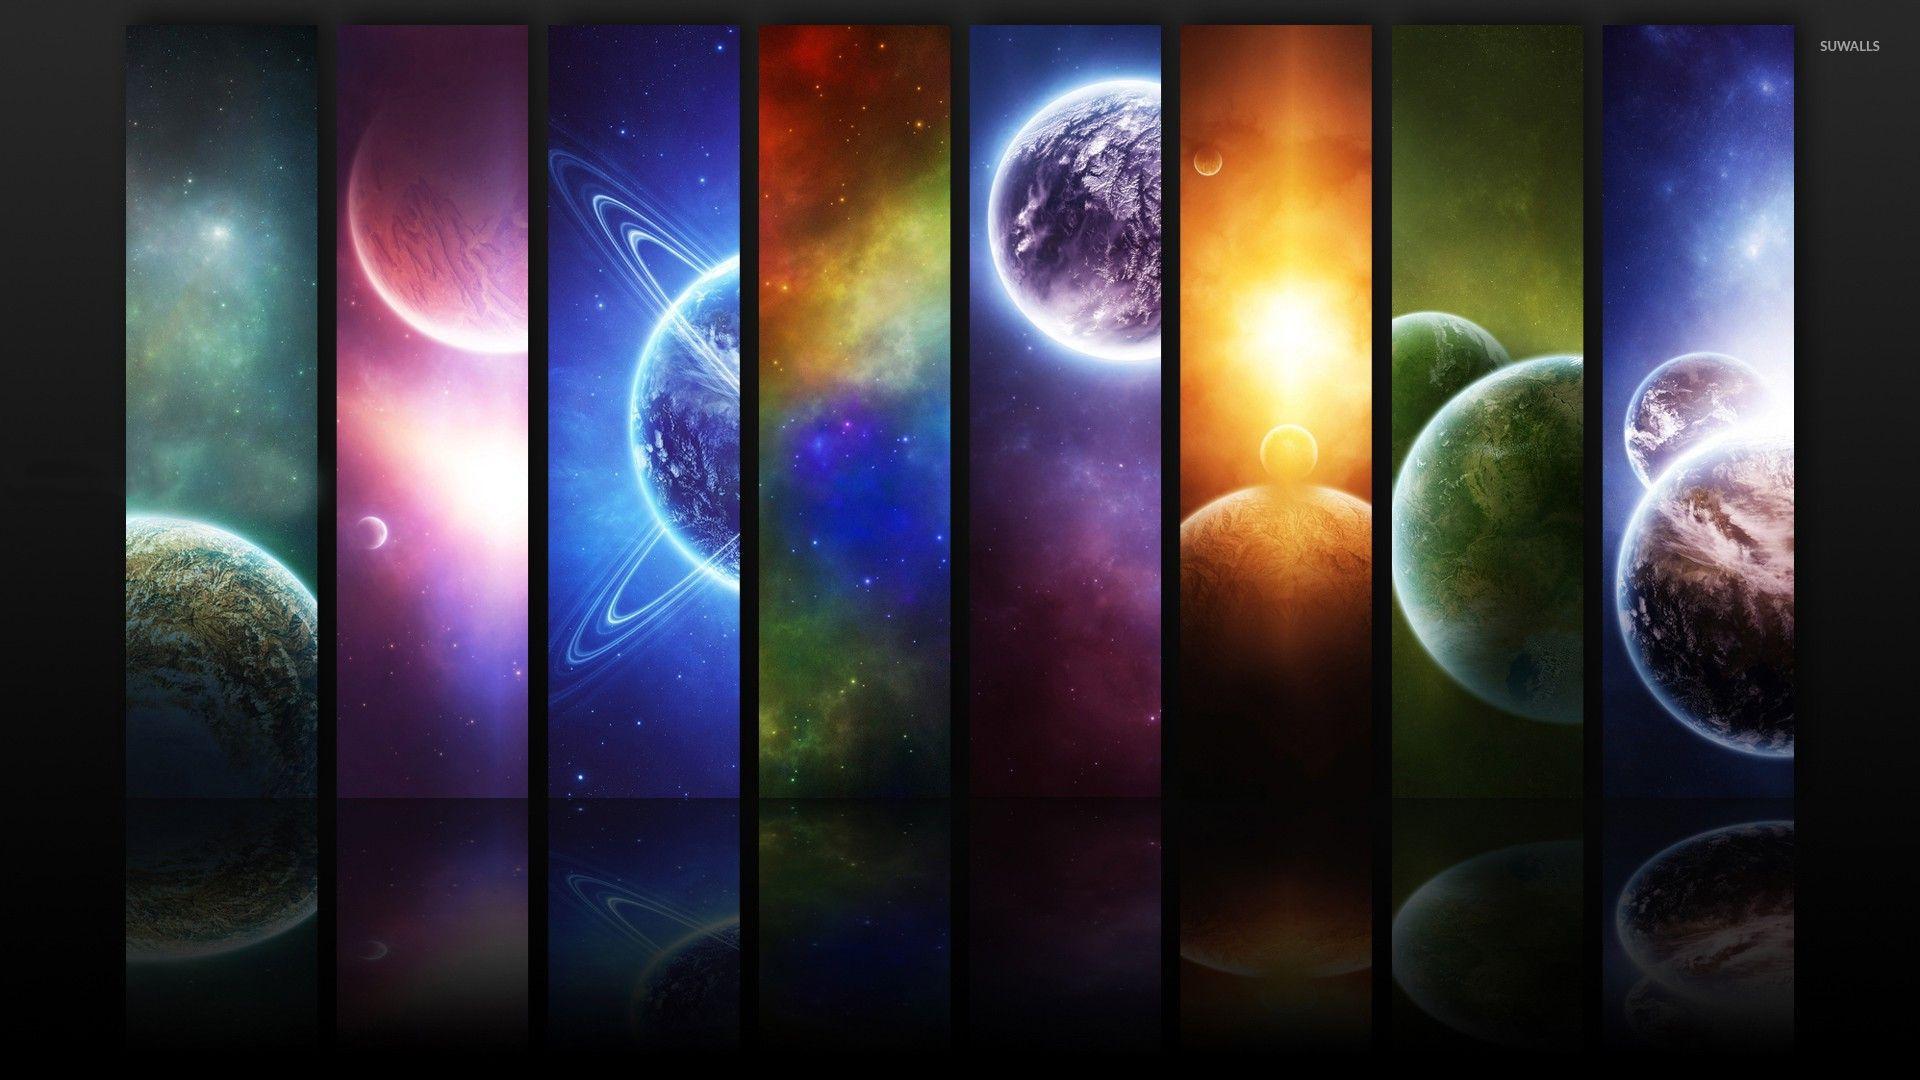 Small portions from the Universe wallpaper wallpaper